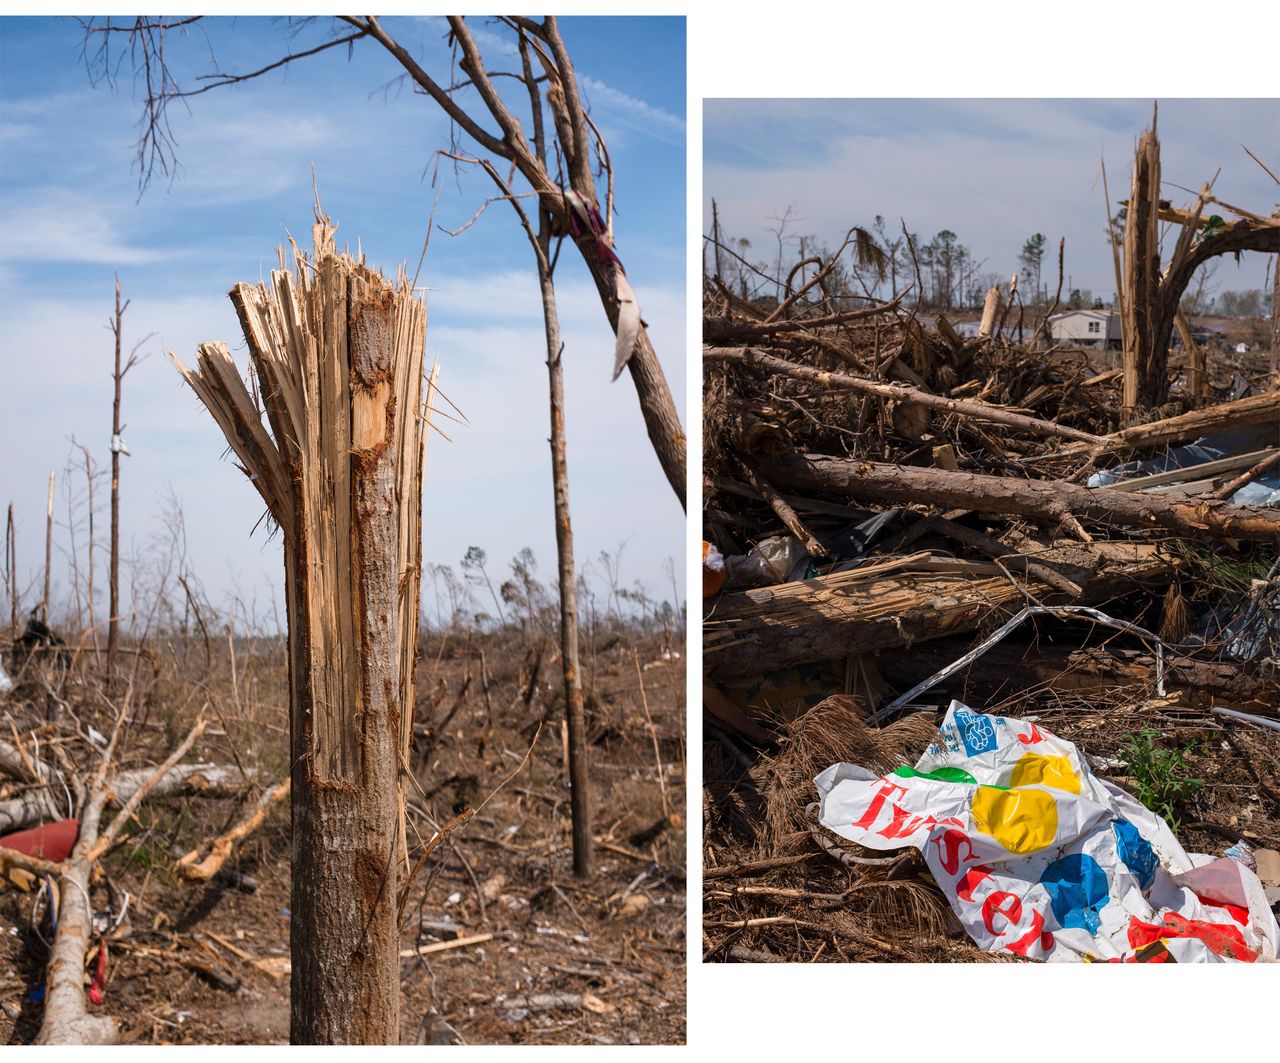 (Left) Trees were ripped apart as if they had been exploded by dynamite in Alabama's Lee County. (Right) A bit of irony -- the party game Twister is seen amid the debris left behind by the devastating tornado.